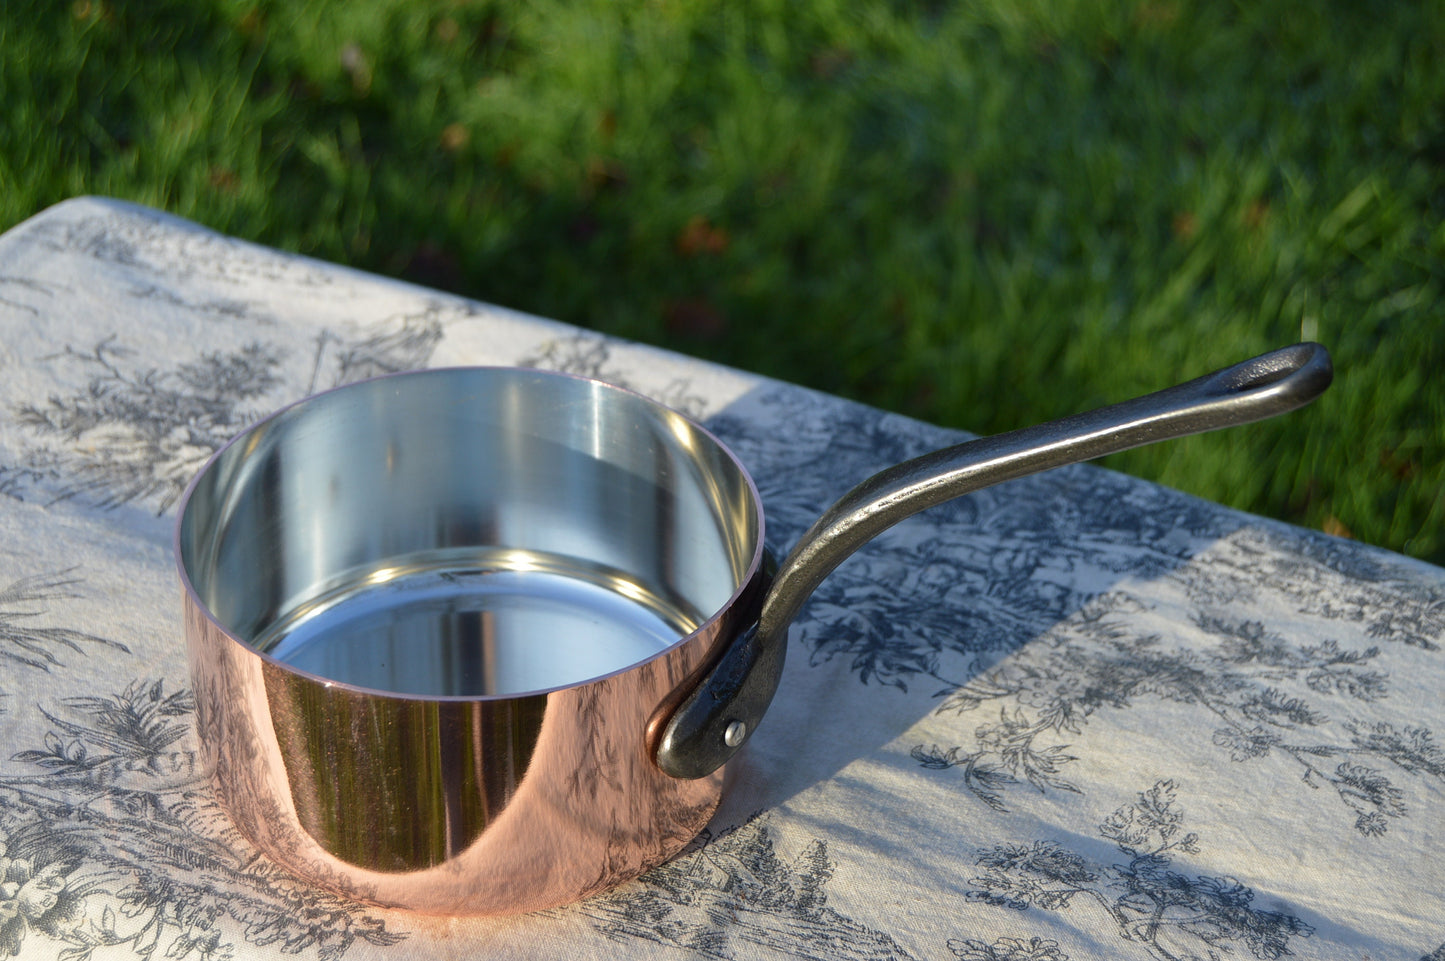 New 14cm NKC Copper Pan Tin Lined 1.5mm Professional Normandy Kitchen Copper Pot Iron Handle Steel Rivet Made in France 14cm 5 1/2" Saucepan